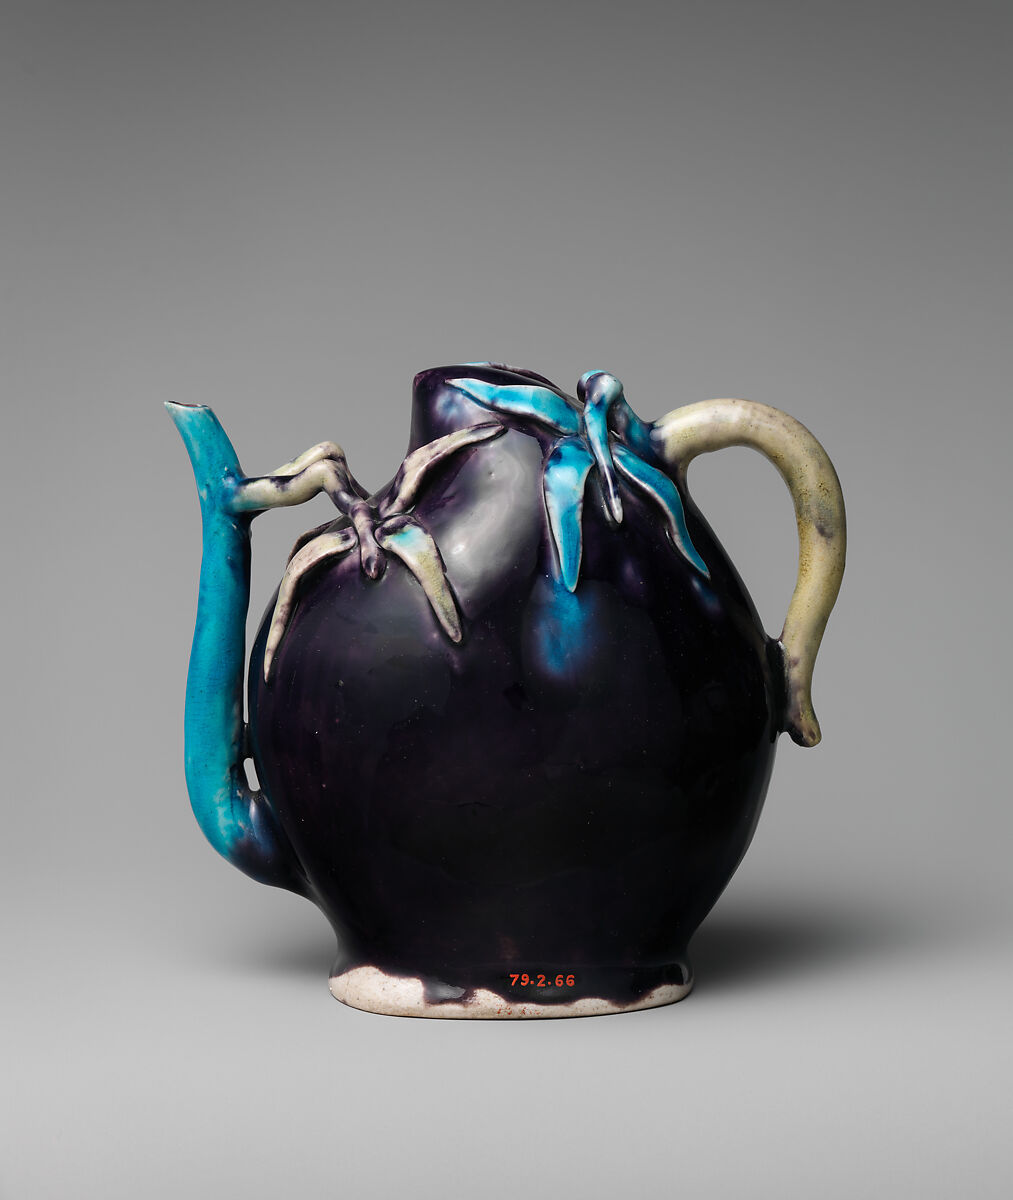 Wine Pot in Shape of a Peach, Porcelain with raised decoration and colored glazes (Jingdezhen ware), China 